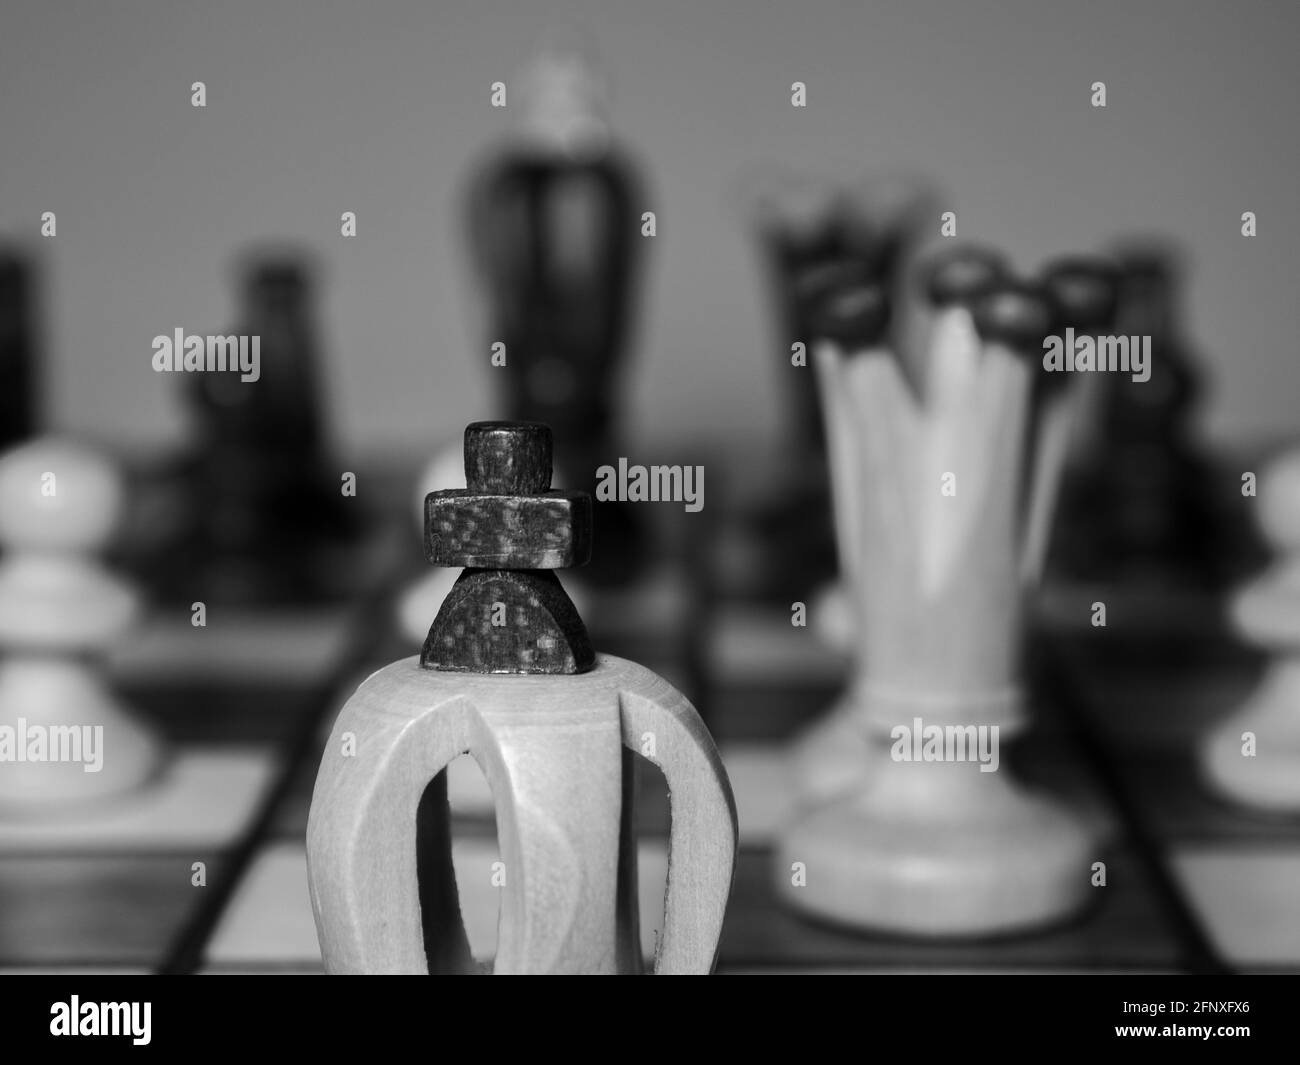 Chess pieces. A close-up on the king and queen chess pieces. Black and white photography. Shallow depth of field. Blurry figures in the background. Stock Photo